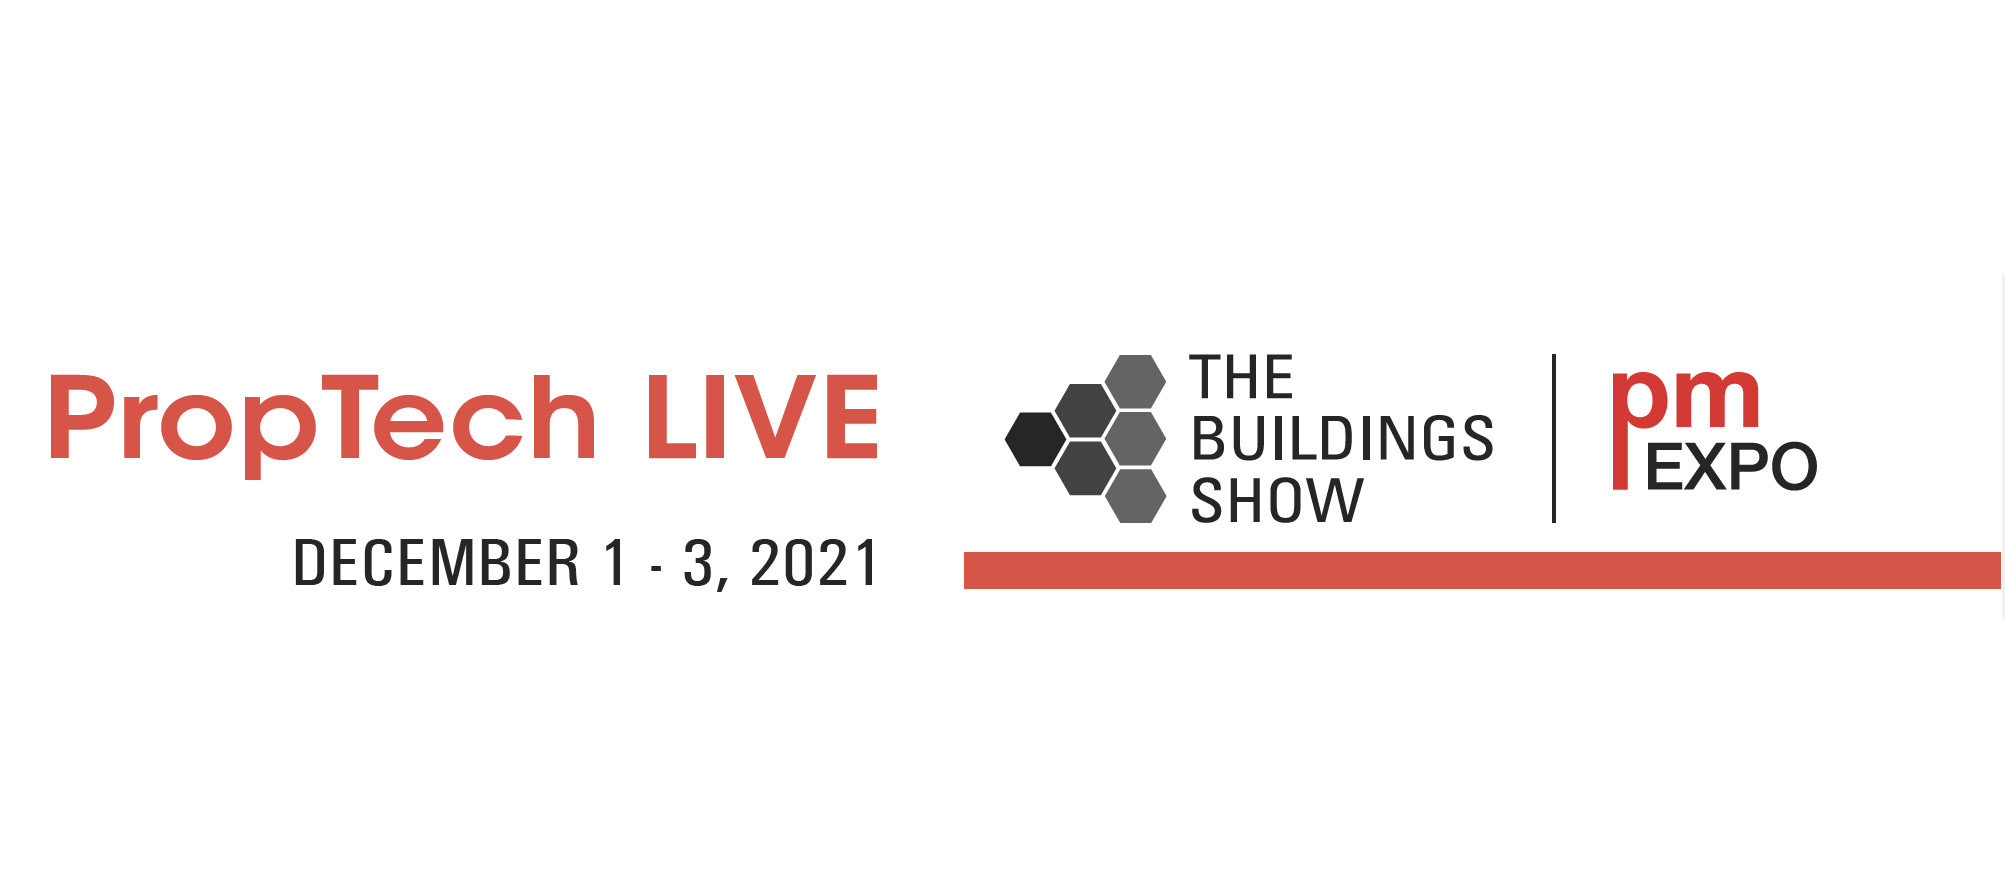 PropTech Live - The Building Show - PM Expo